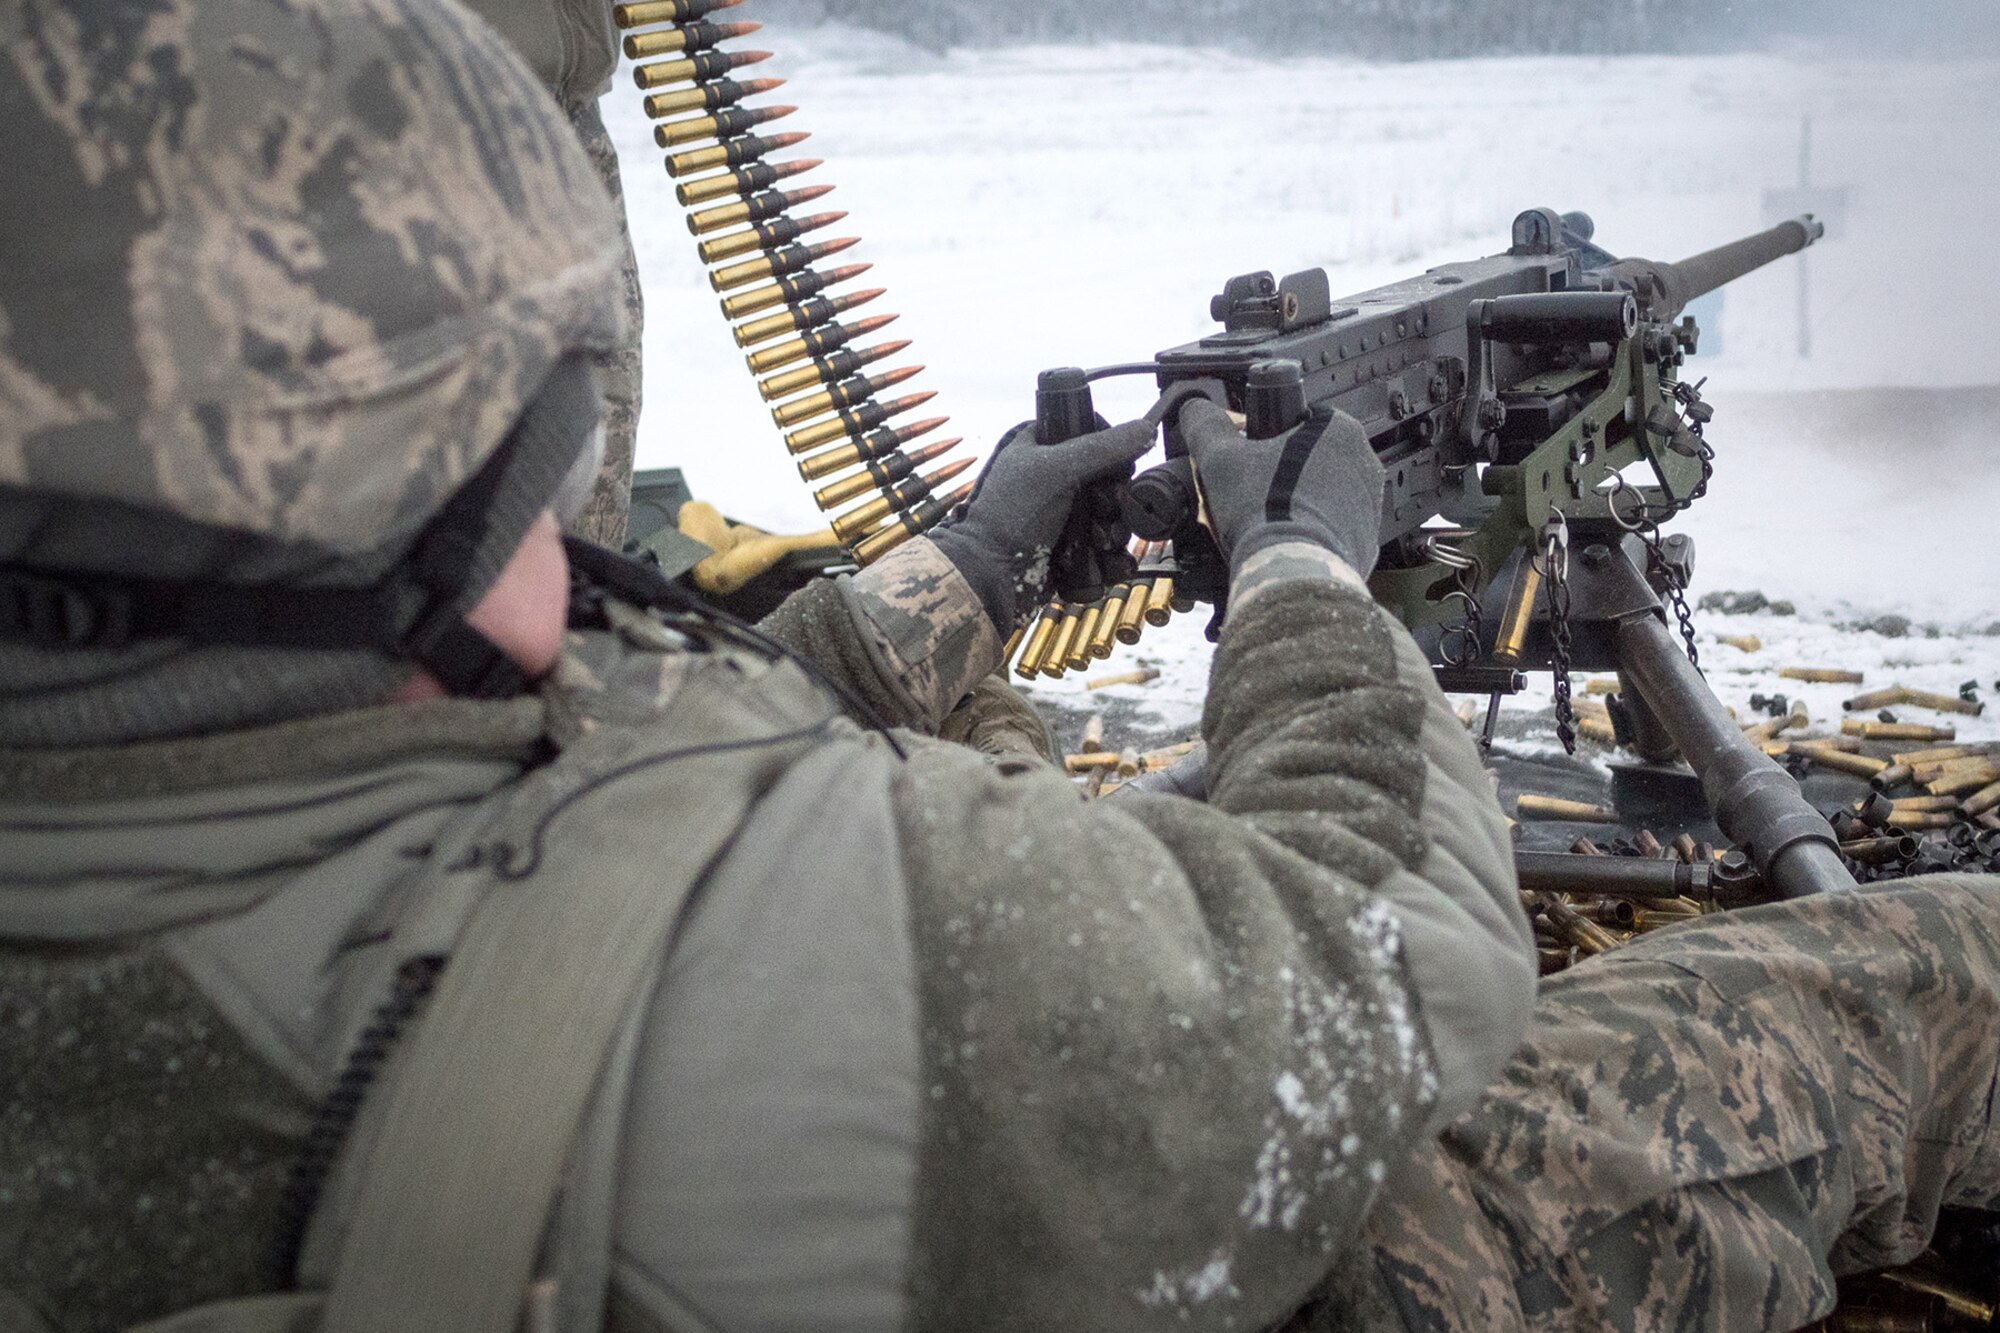 An Airman assigned to the 673d Security Forces Squadron fires an M2 .50 Caliber machine gun during a qualification range on Joint Base Elmendorf-Richardson, Alaska, Jan. 10, 2018. Security Forces Airmen perform extensive training in law enforcement as well as combat tactics to protect U.S. Military bases and assets both stateside and overseas.